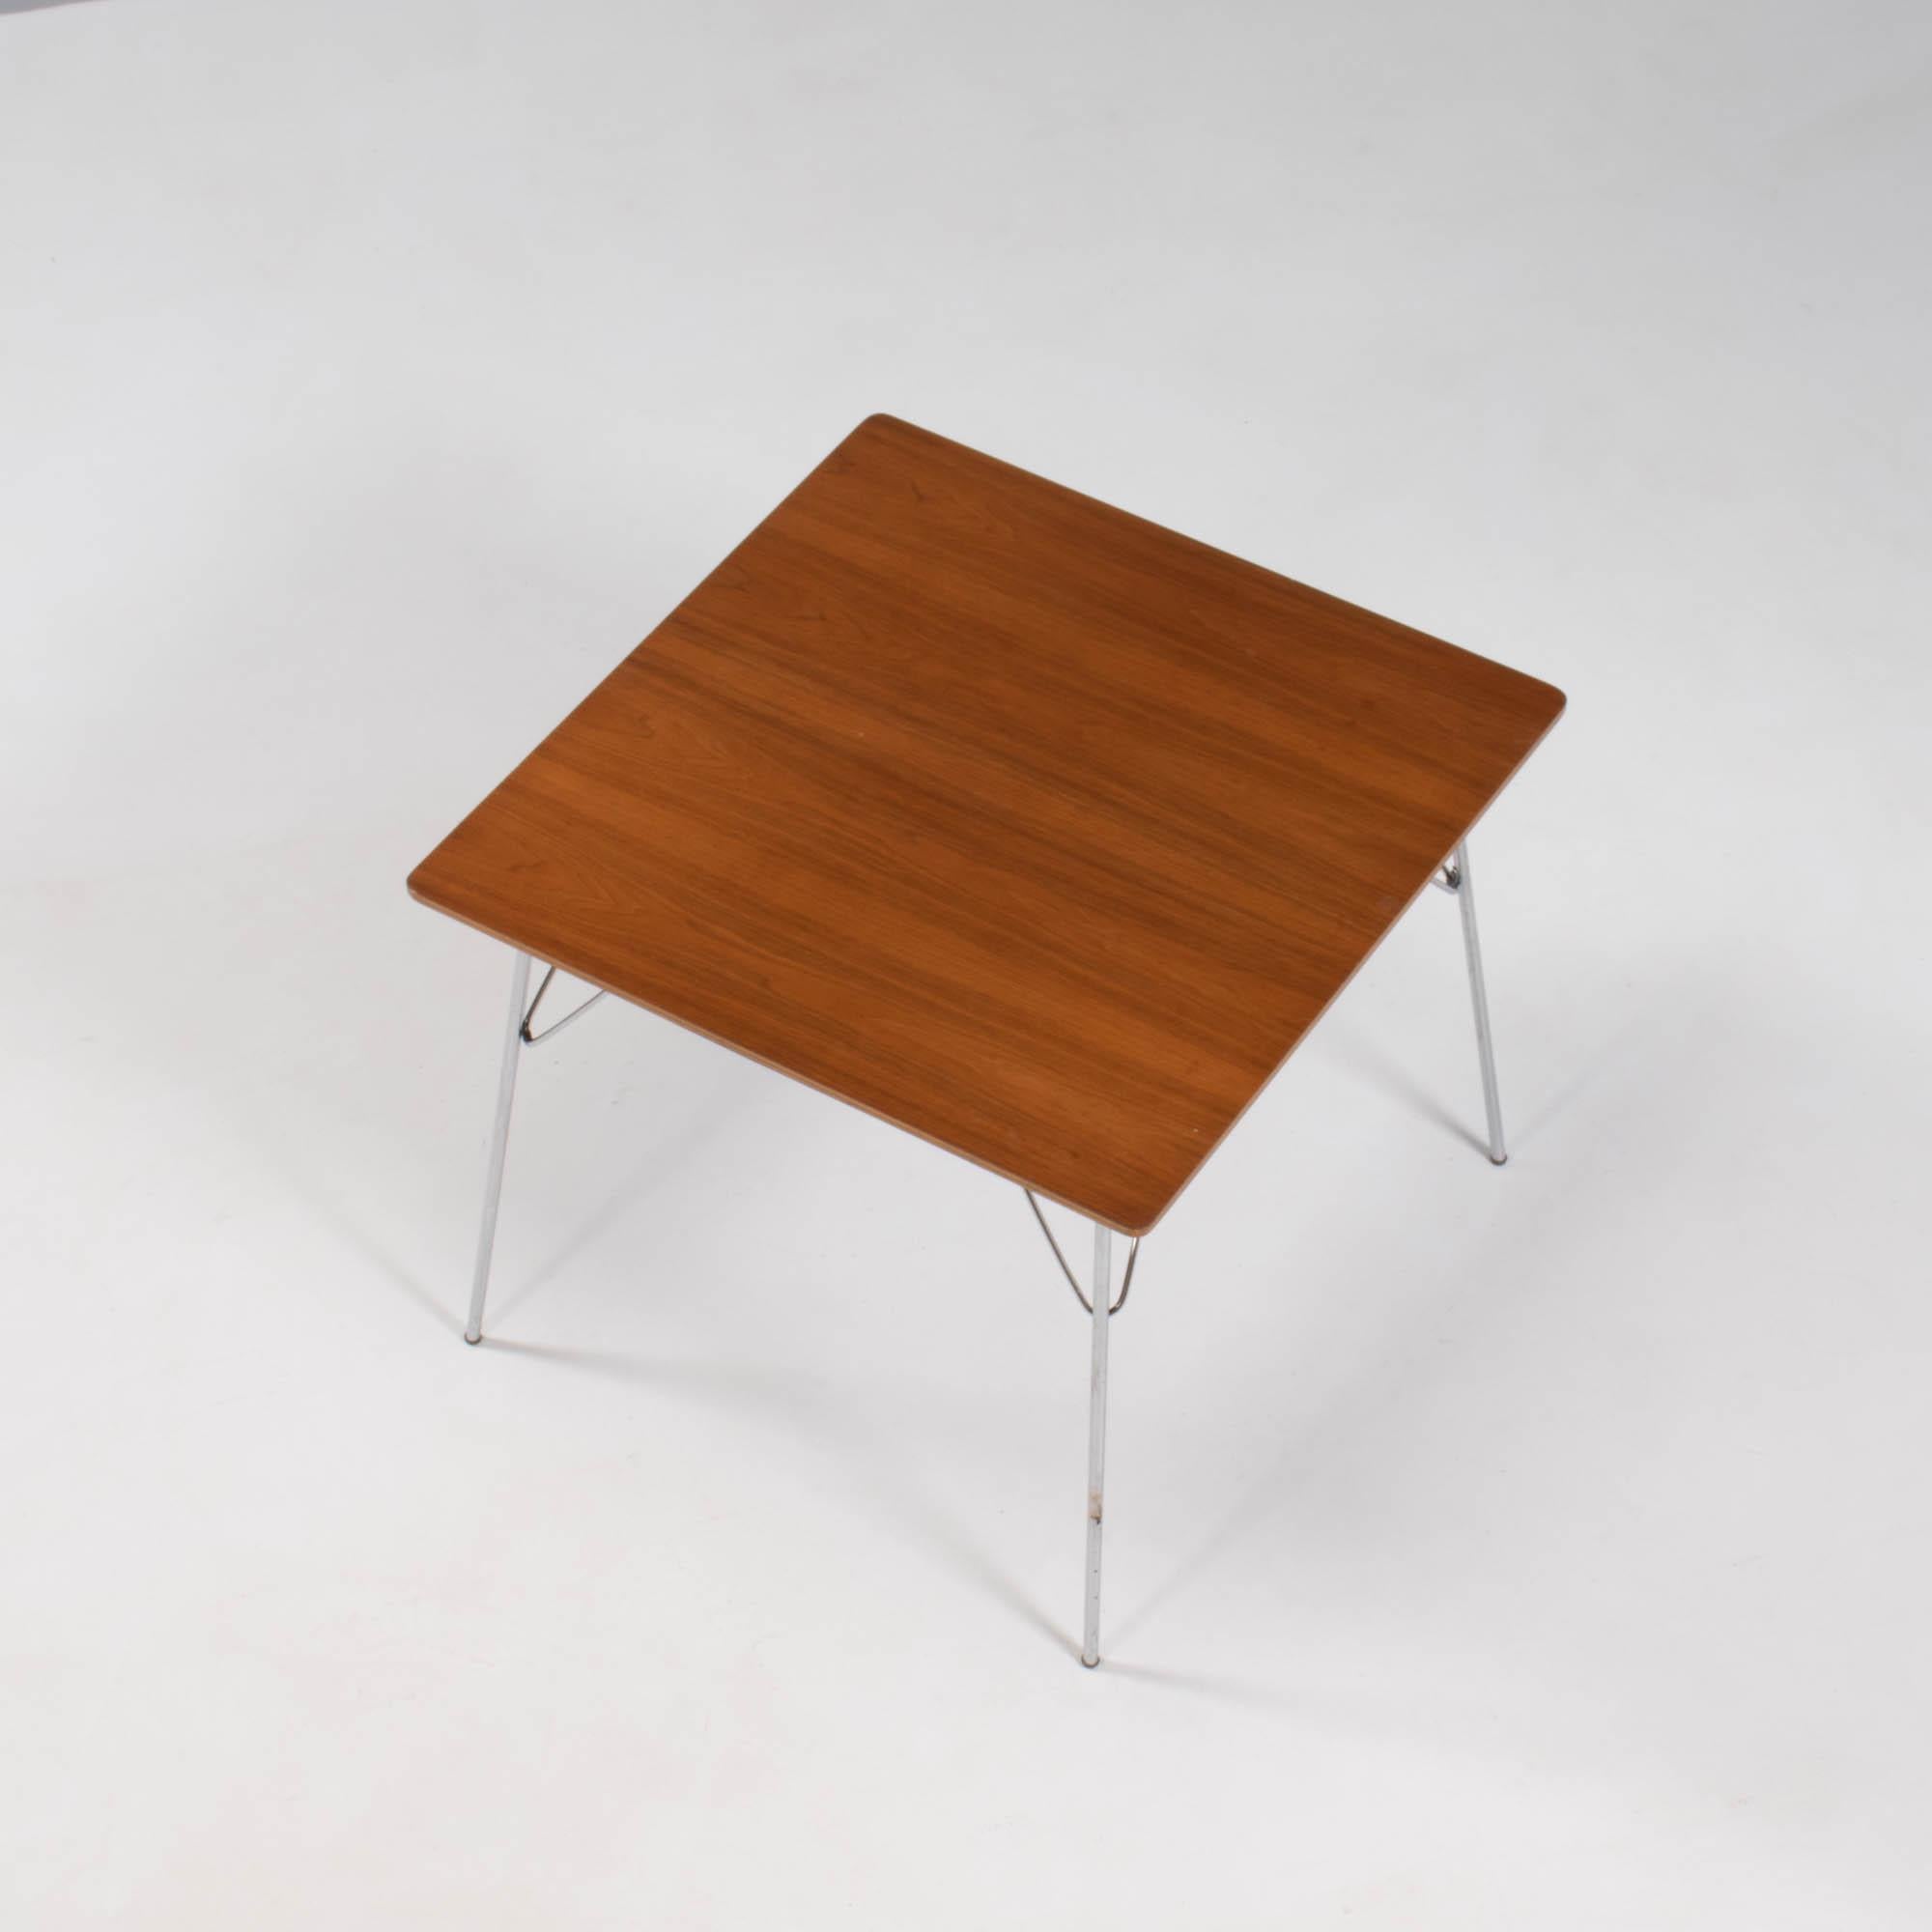 Originally released in 1947, the DTM Table had four variants. The DTM-2 was the square table with a natural veneer top. Herman Miller manufactured the tables until 1964 when it was discontinued.

The ingenious design by Charles and Ray Eames